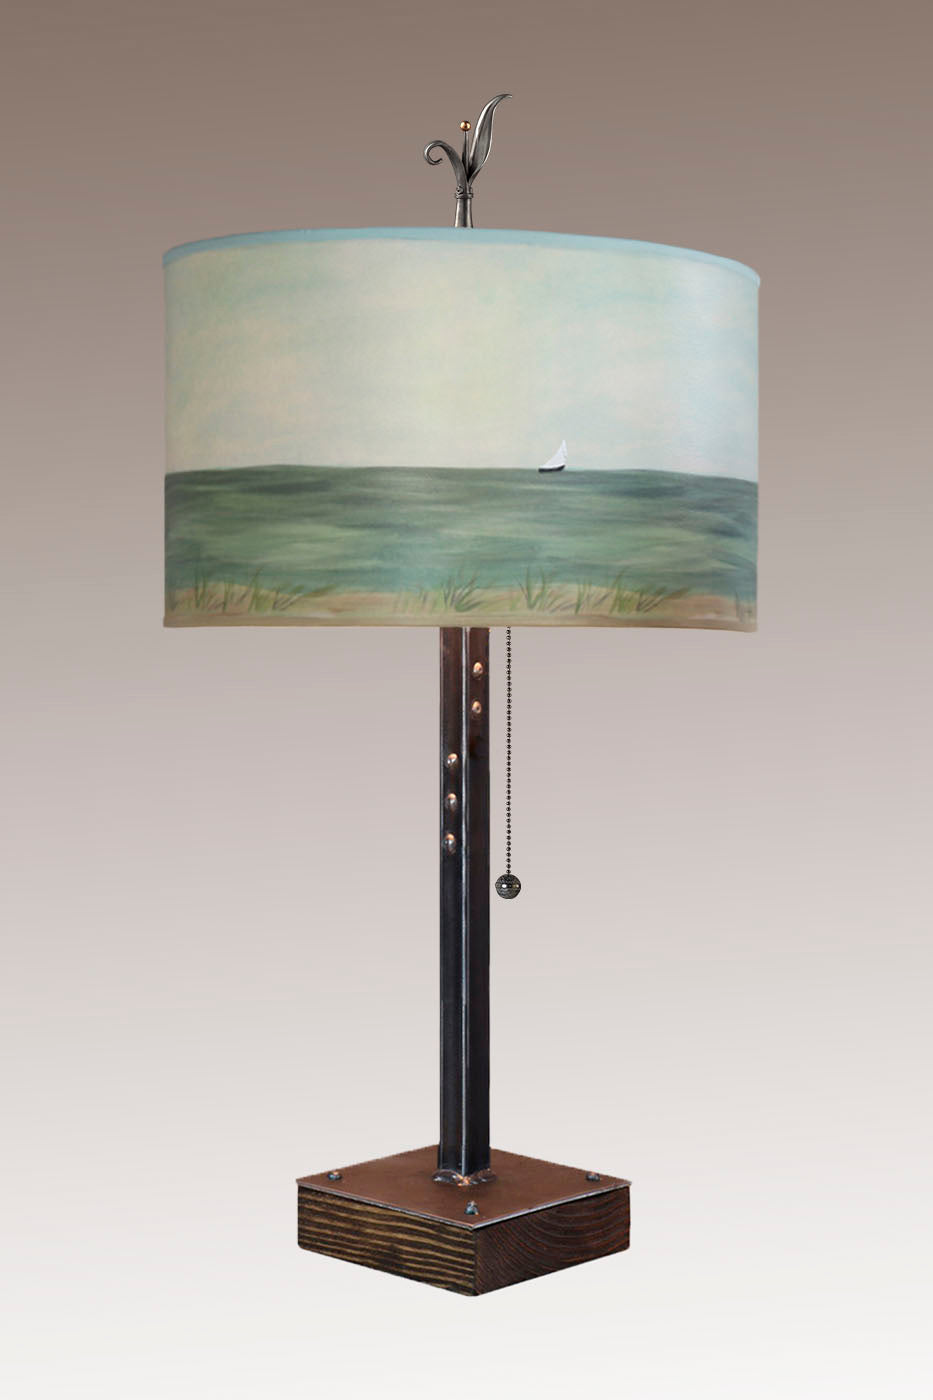 Steel Table Lamp on Wood with Large Drum Shade in Shore